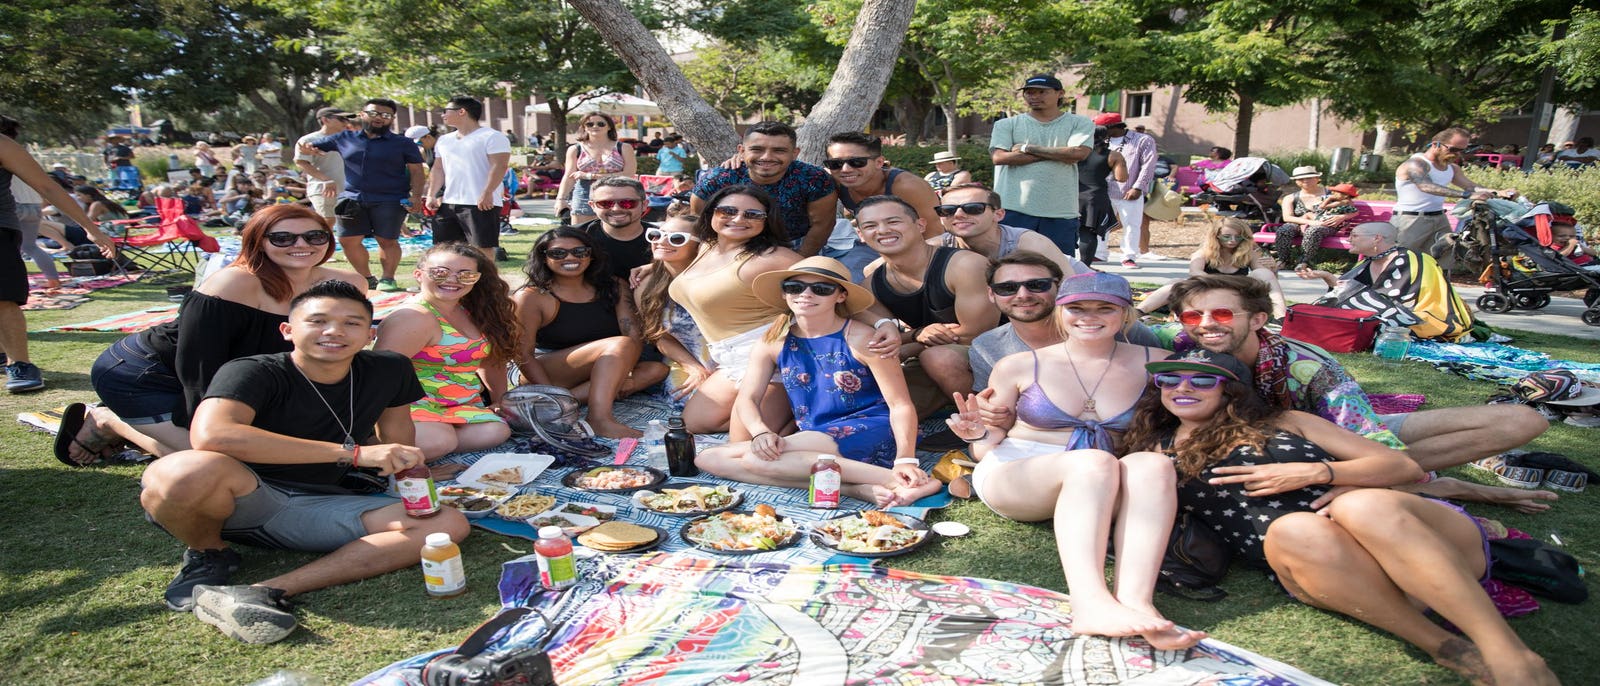 The Best Places in Los Angeles for a Picnic | Discover Los Angeles